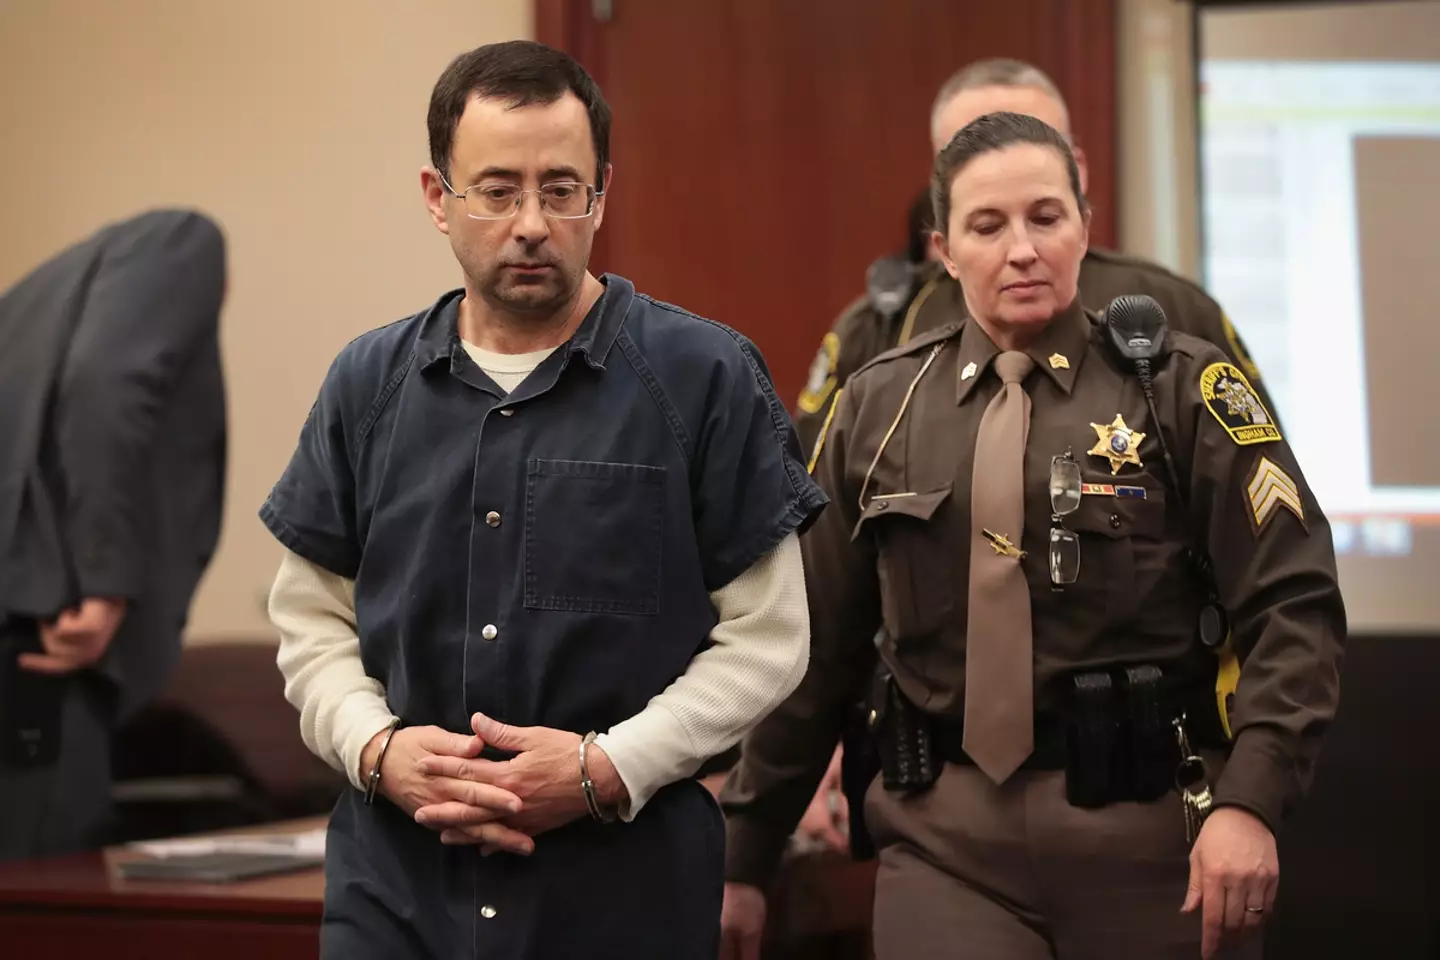 Nassar was convicted and sentenced to upwards of 300 years in jail.